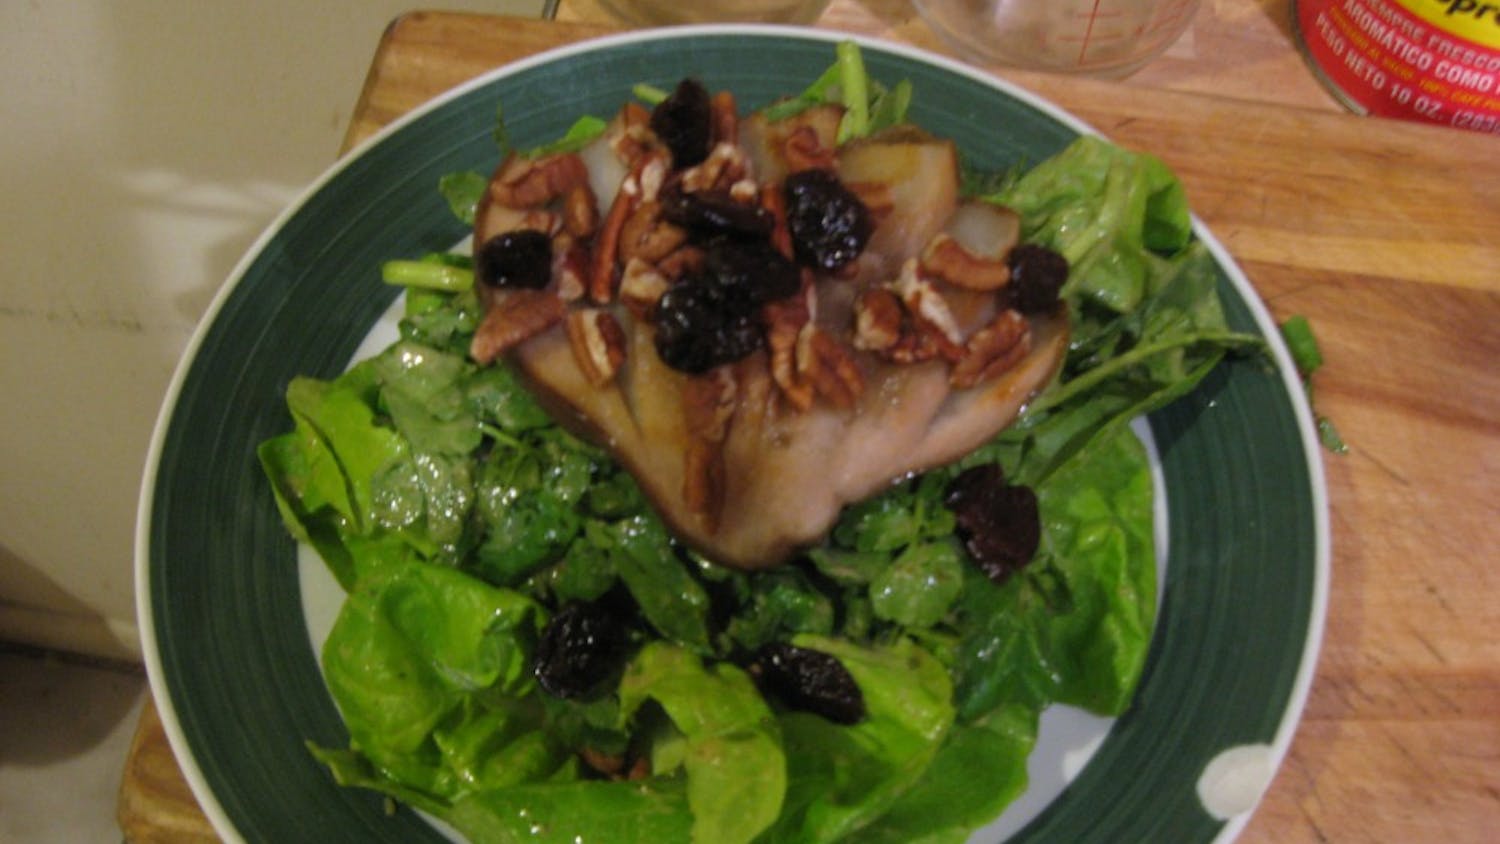 A bibb lettuce and watercress salad with roasted pears and dried cherries is just the thing to kick off a culinary treat for your sweetheart this Valentine\'s Day.